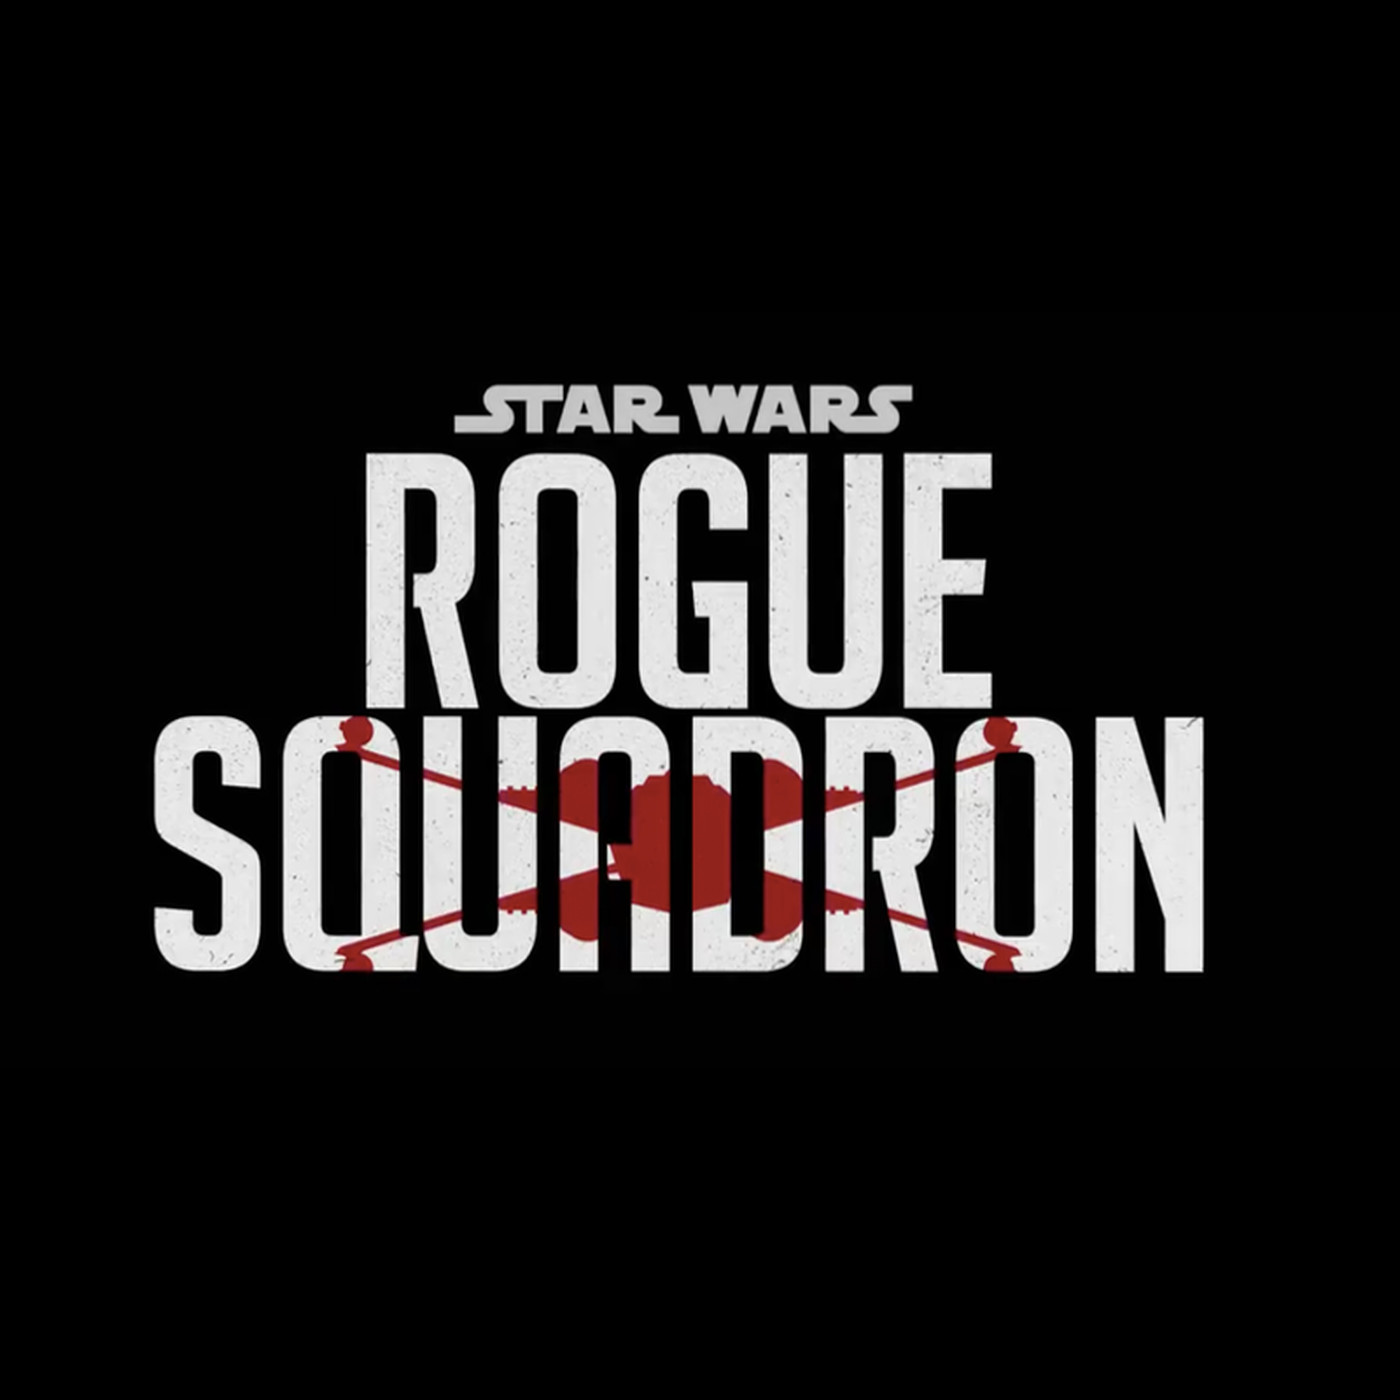 Wonder Woman 1984's Patty Jenkins is directing the next Star Wars movie, Rogue Squadron - The Verge